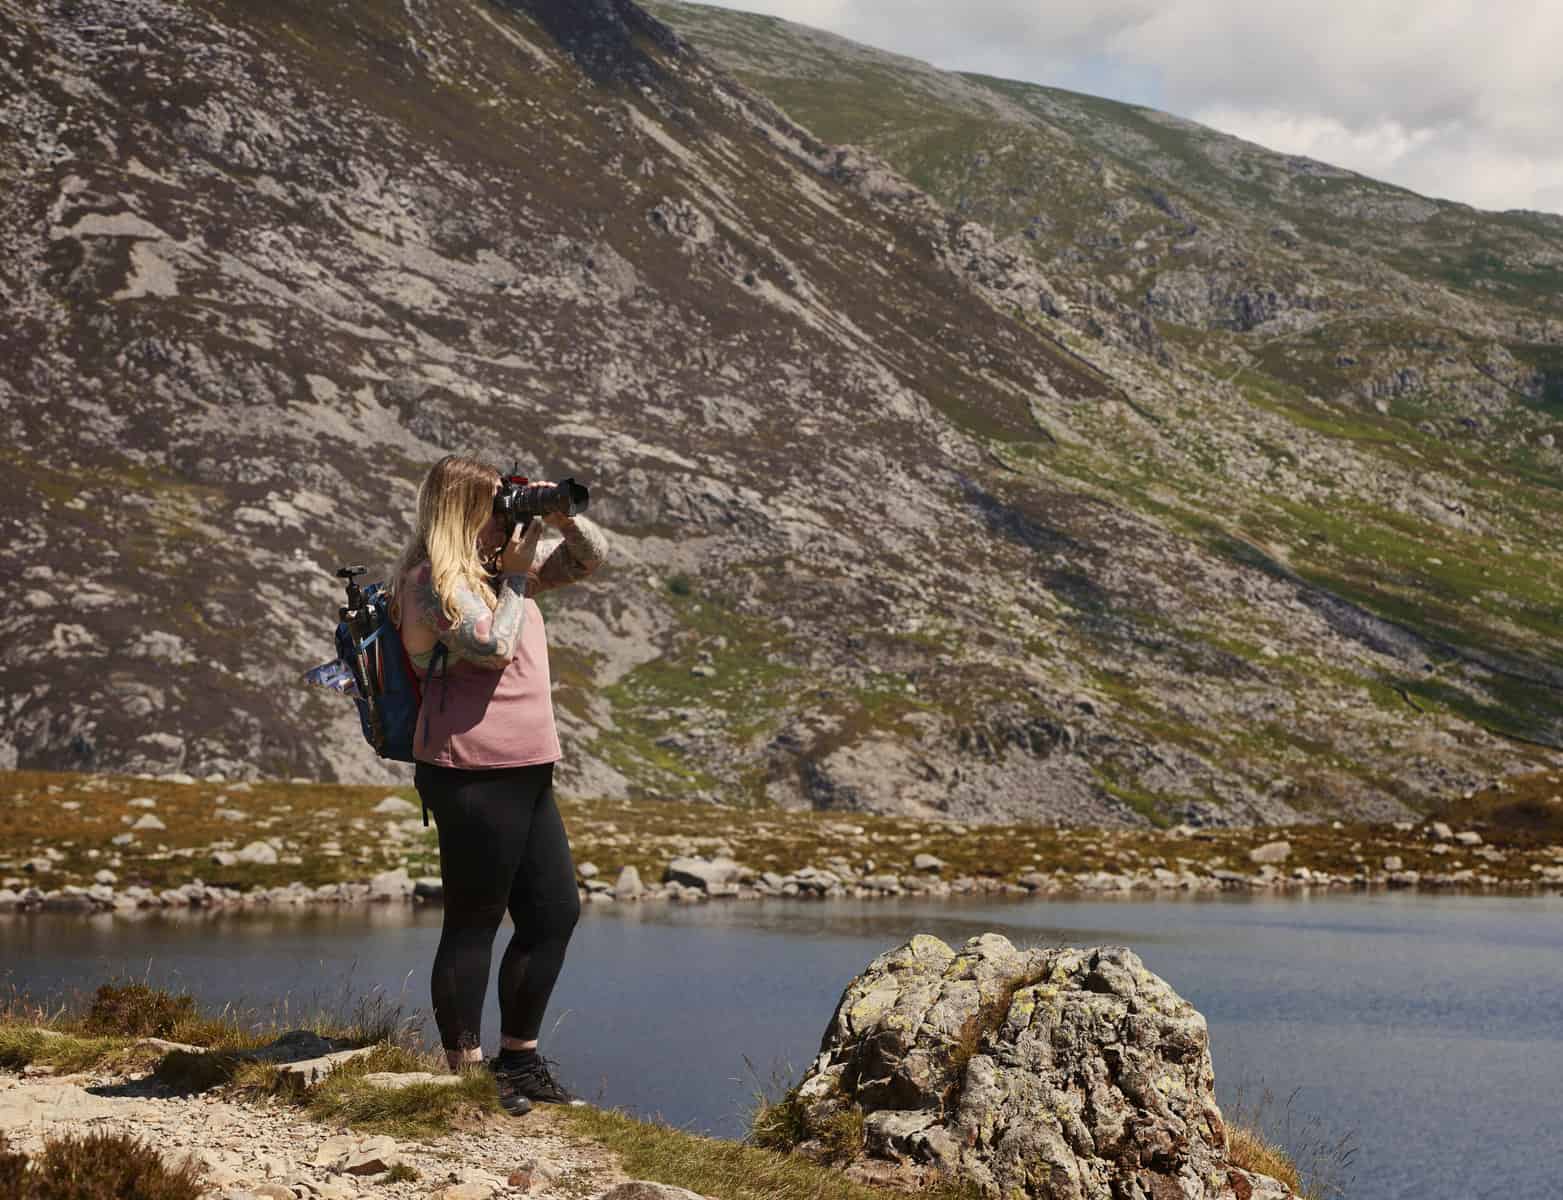 ID: A landscape image. Fay stands pictured full length on the left hand side of the frame with backpack holding a tripod. Fay is taking a picture handheld and wears black shoes, black trousers and a pink top. In the background is a lake and a rocky mountain scene out of focus.